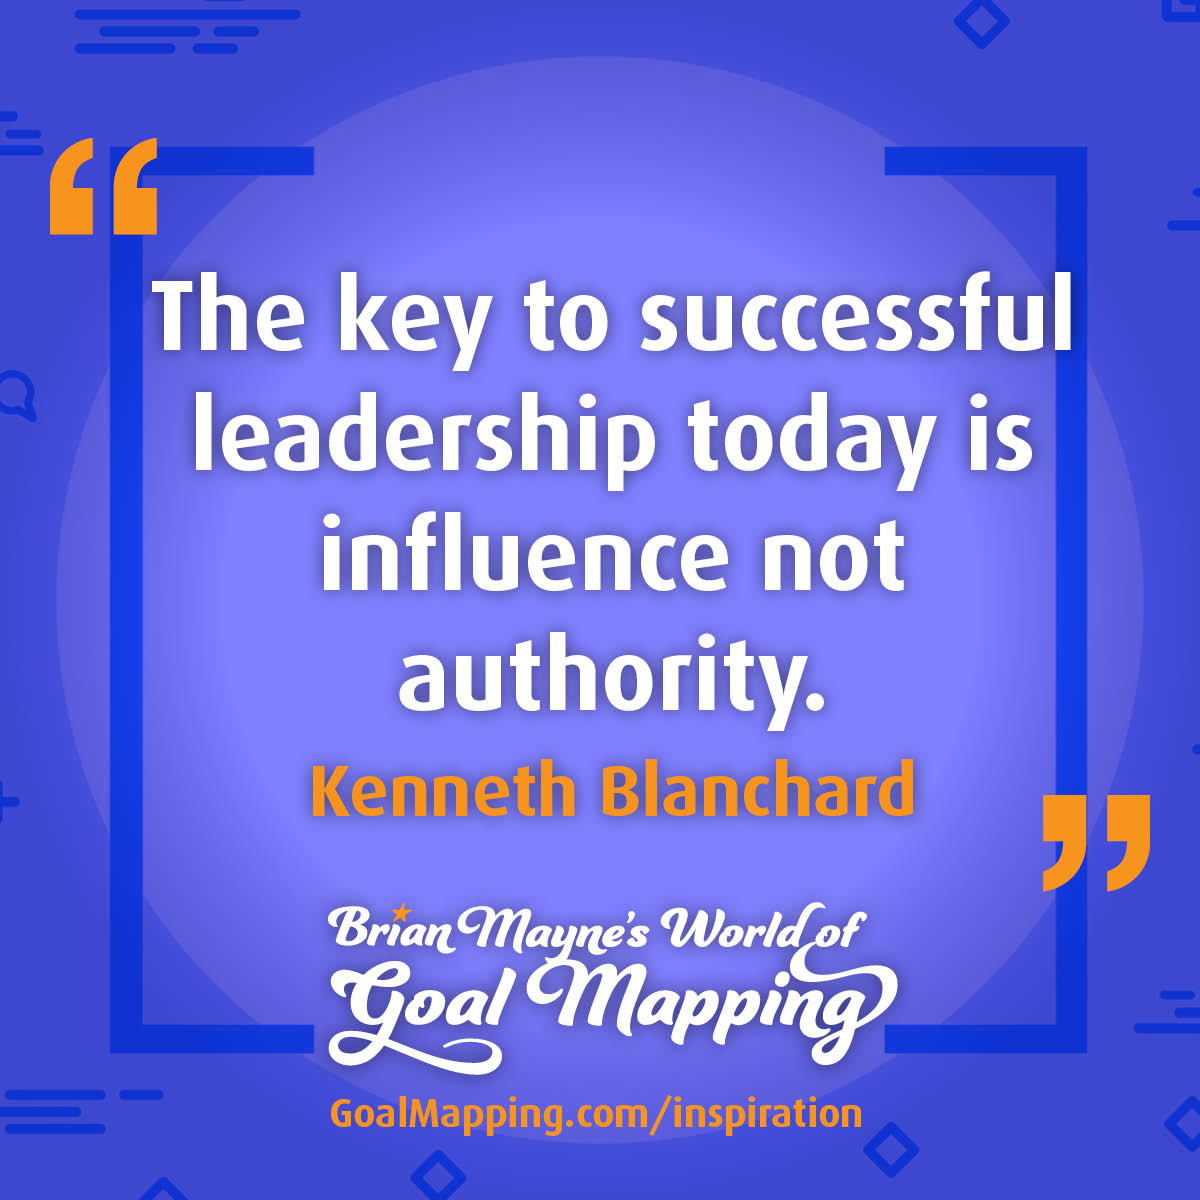 "The key to successful leadership today is influence not authority." Kenneth Blanchard